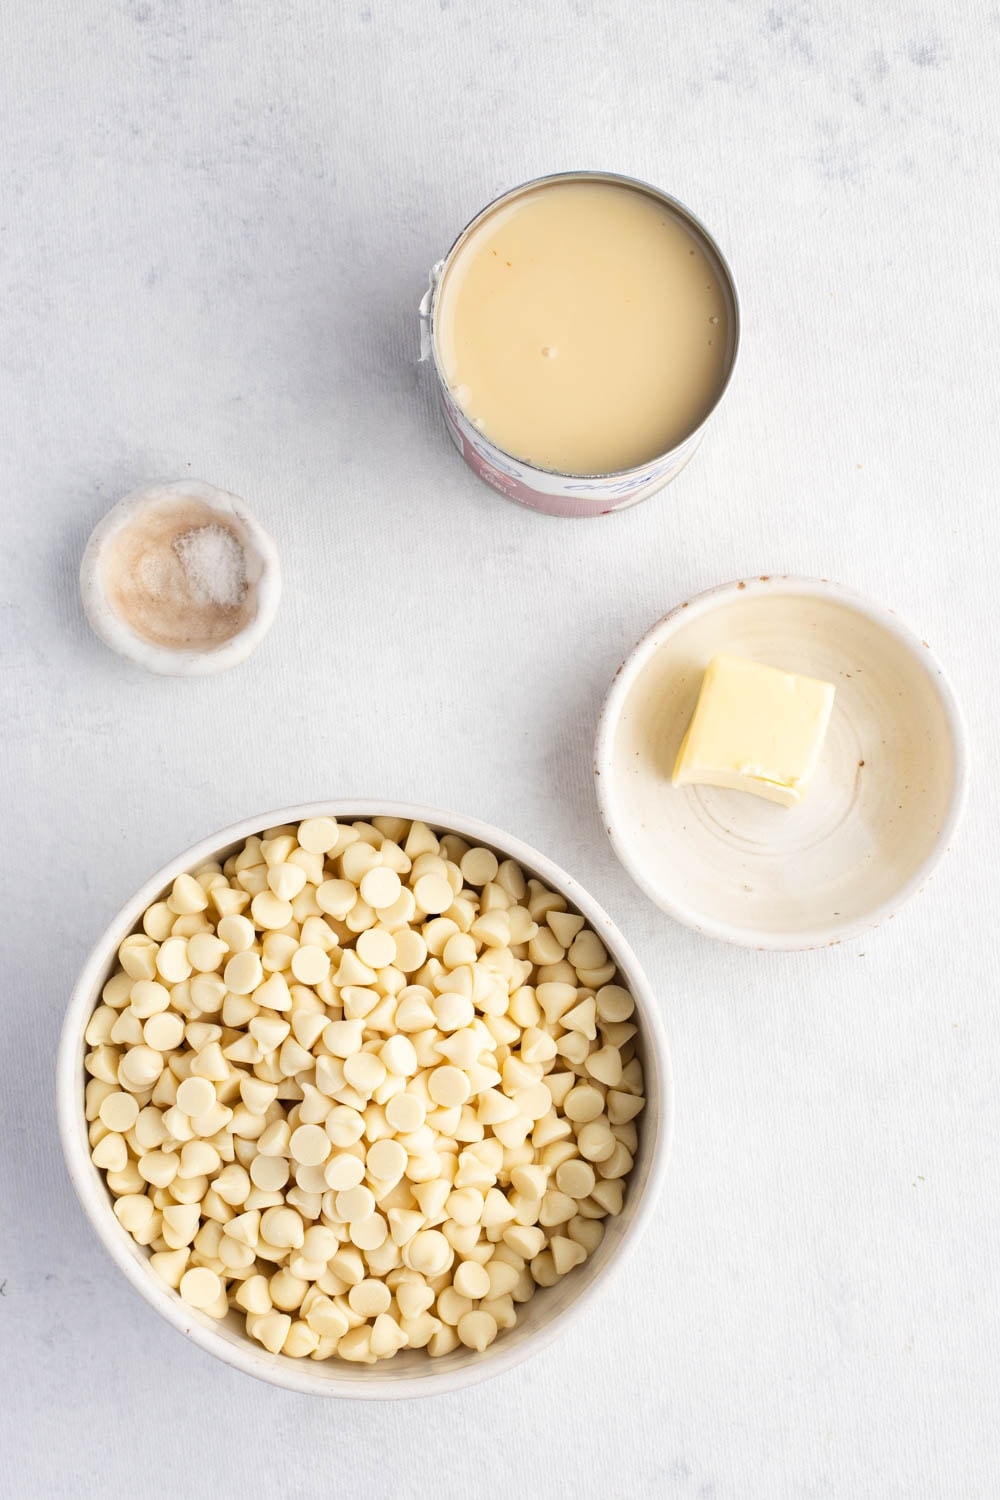 White Chocolate Fudge Ingredients - White Chocolate Chips, Sweetened Condensed Milk, Butter and Salt